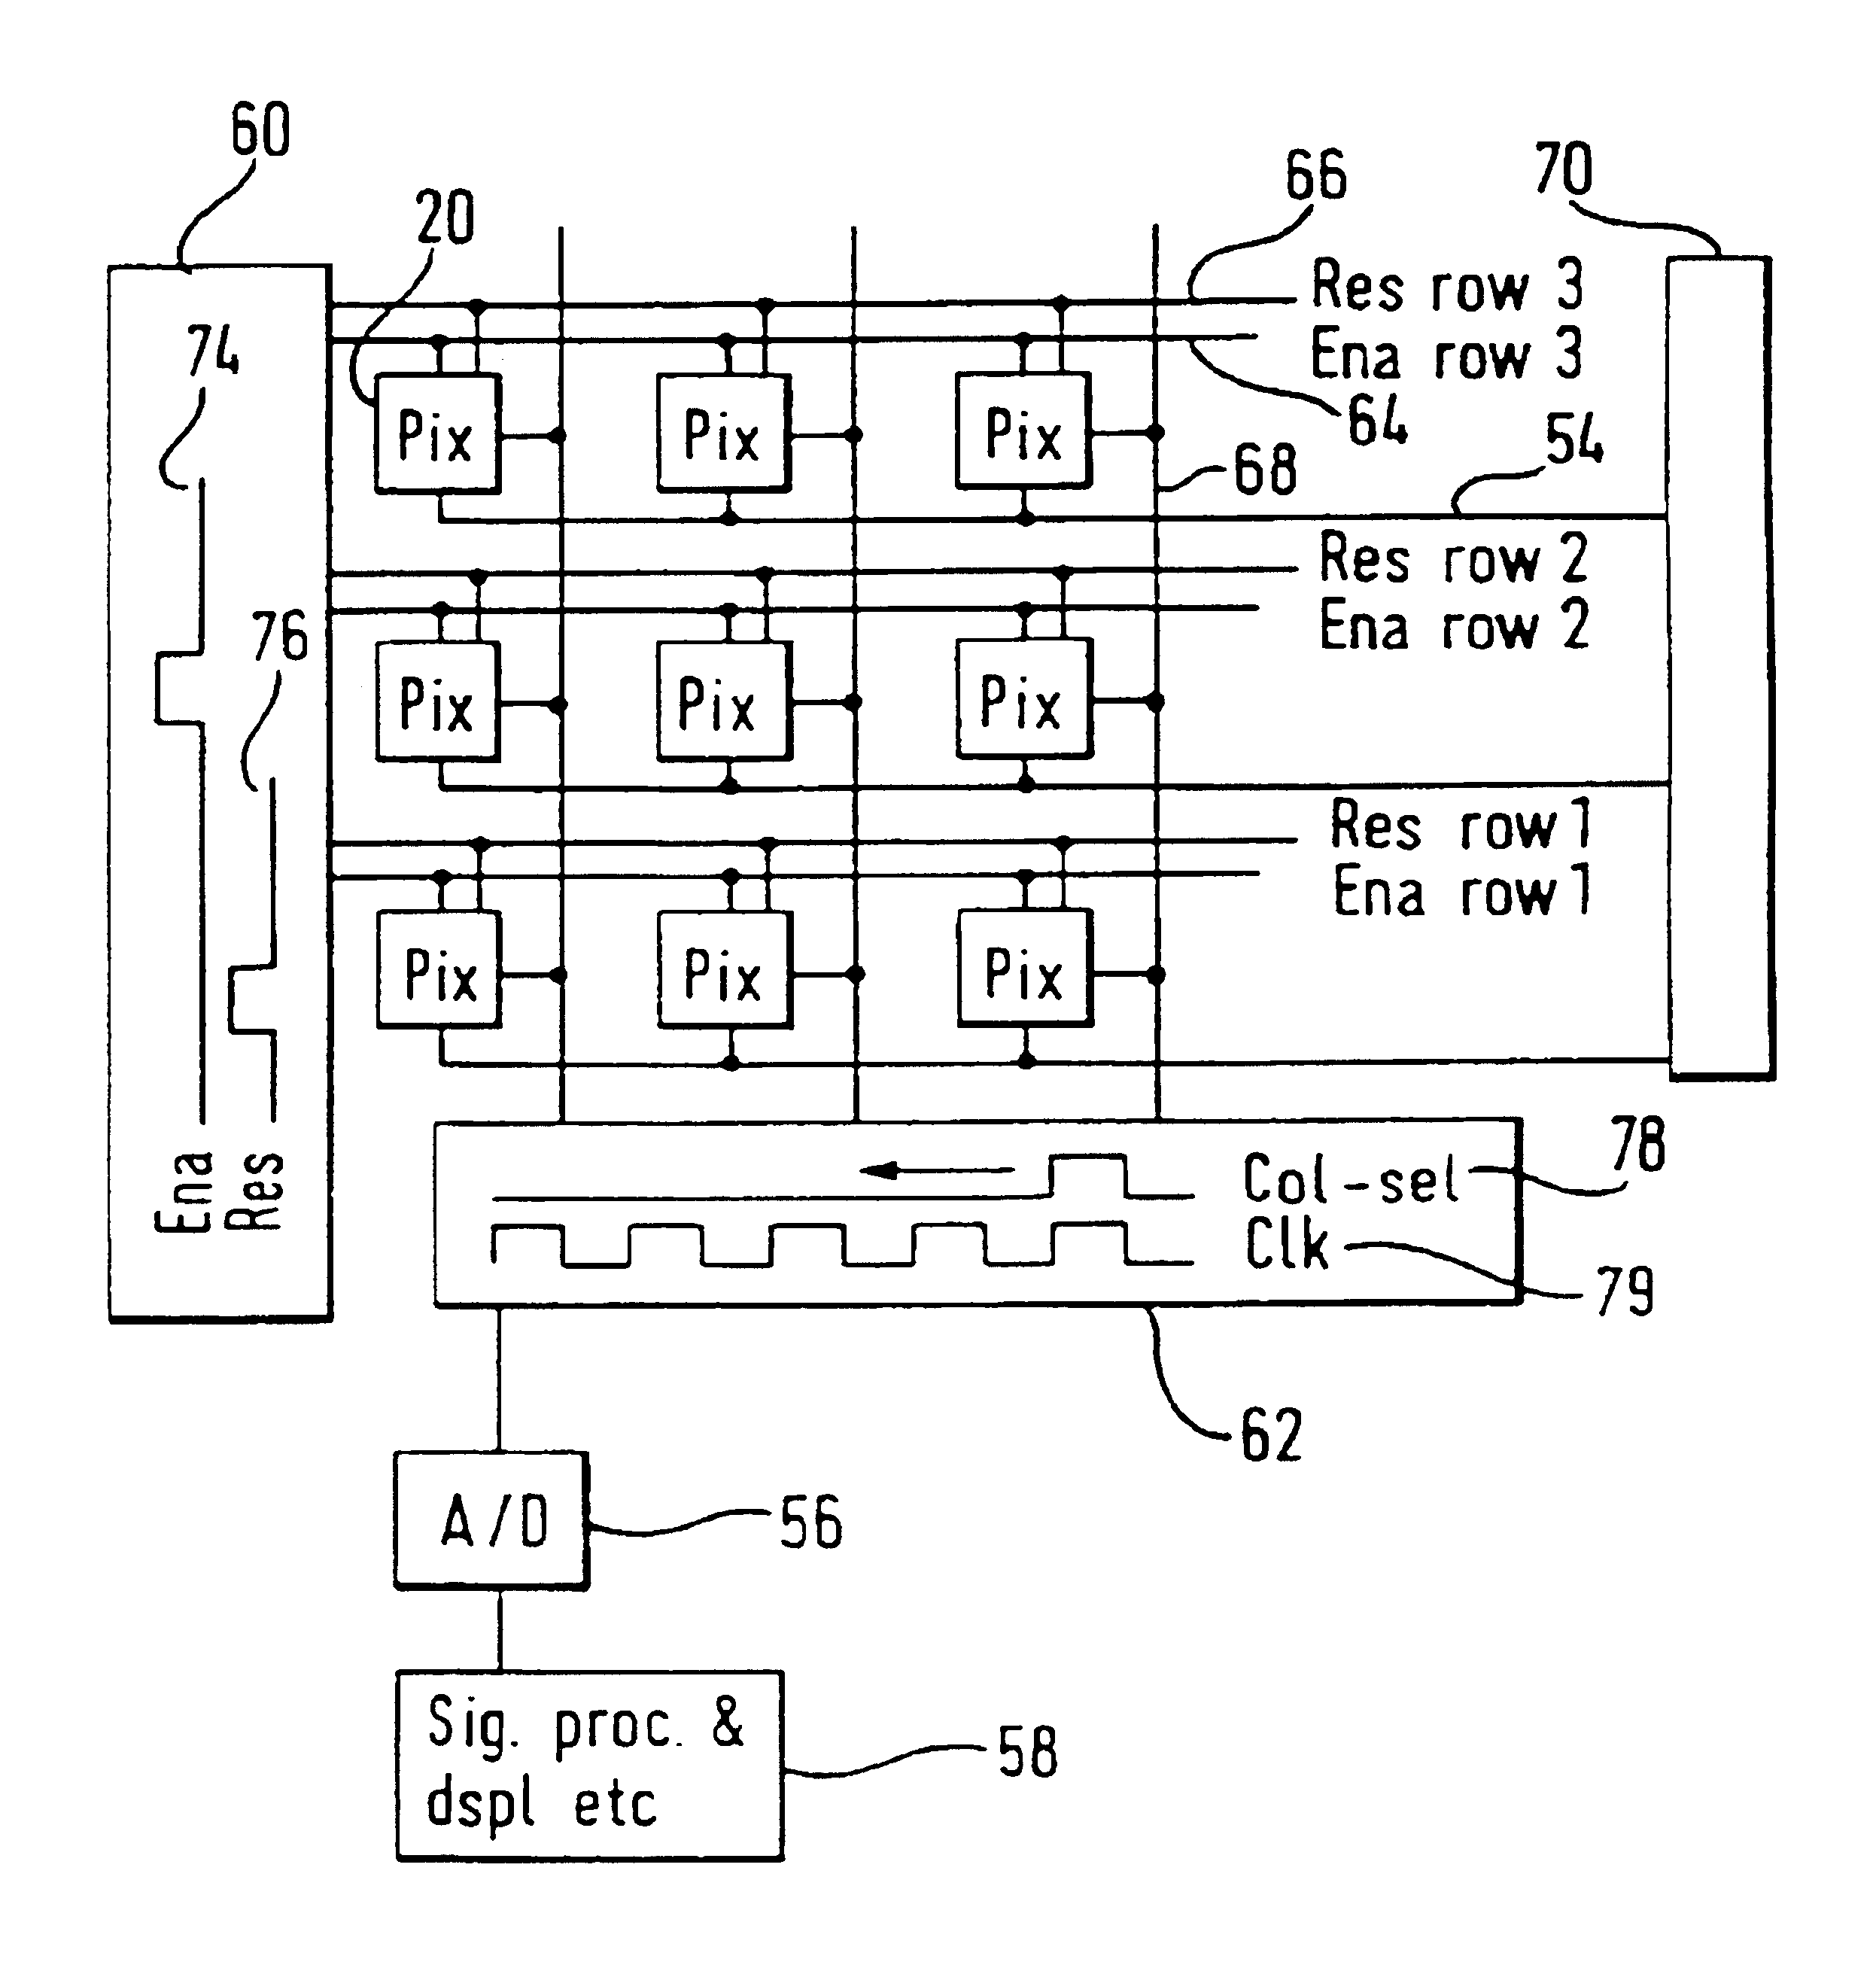 Semiconductor radiation imaging device including threshold circuitry